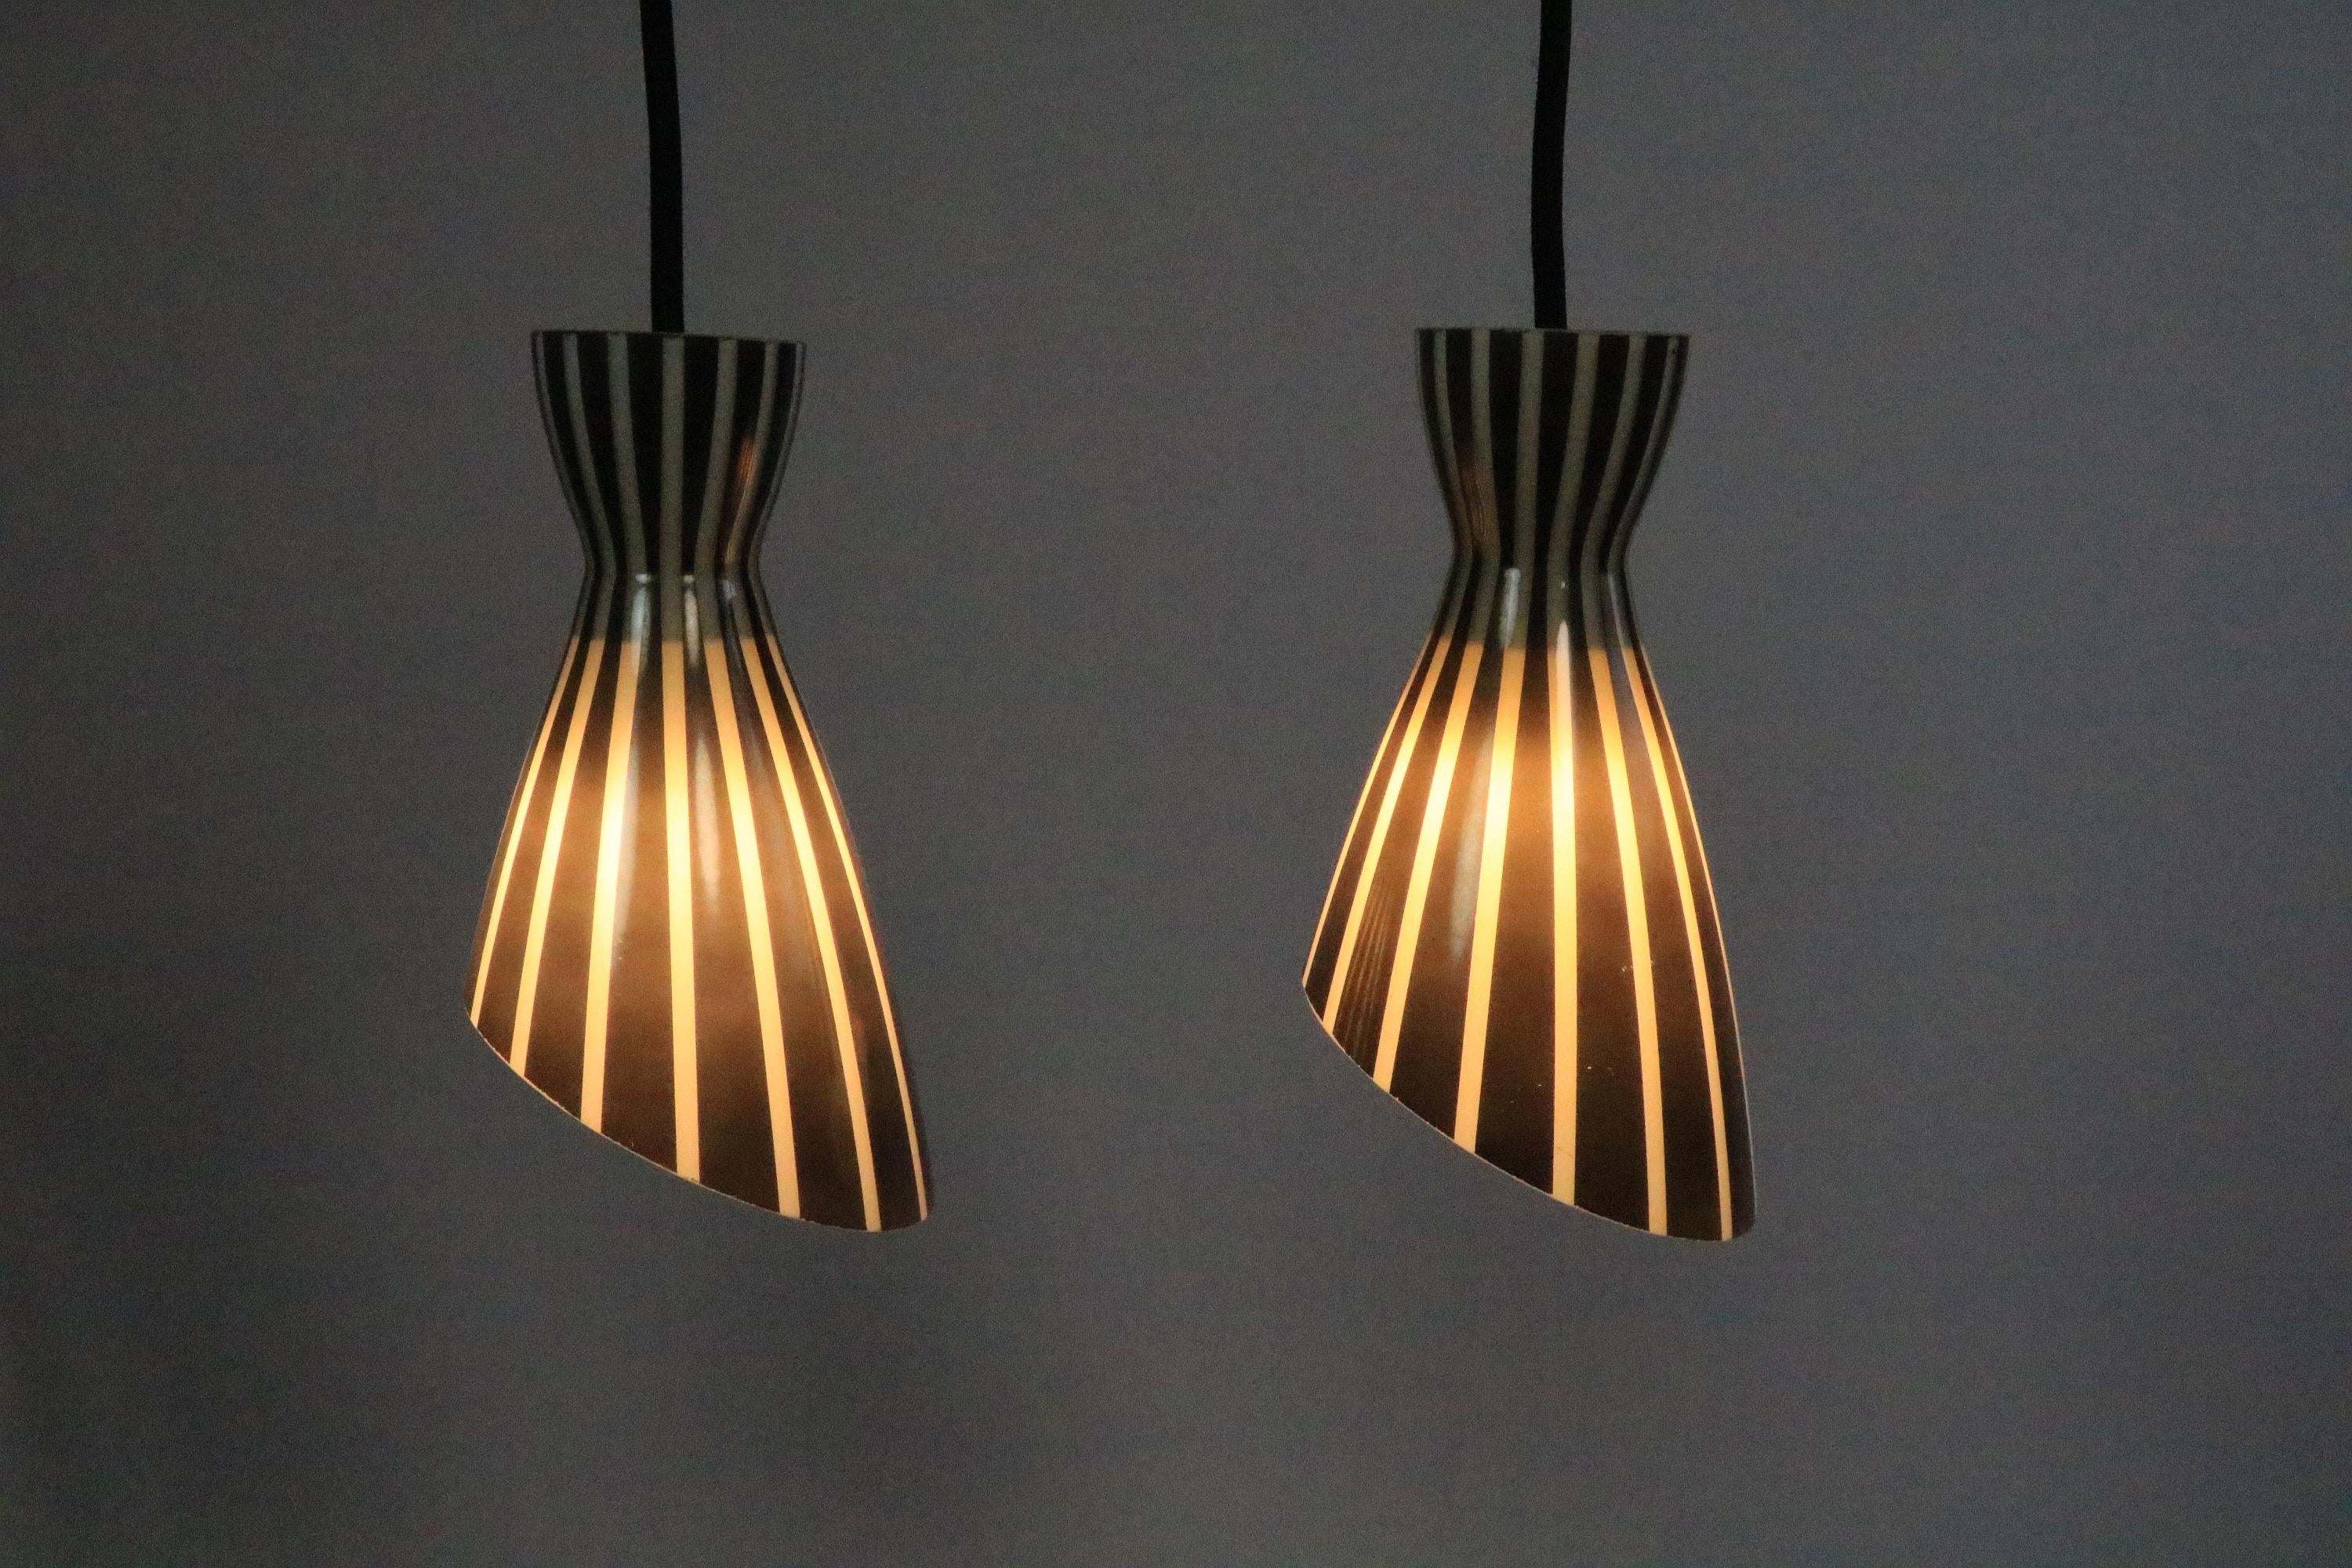 Set of 2 Glass Hanging Lamps, Black and White Striped, Original 1950s For Sale 6